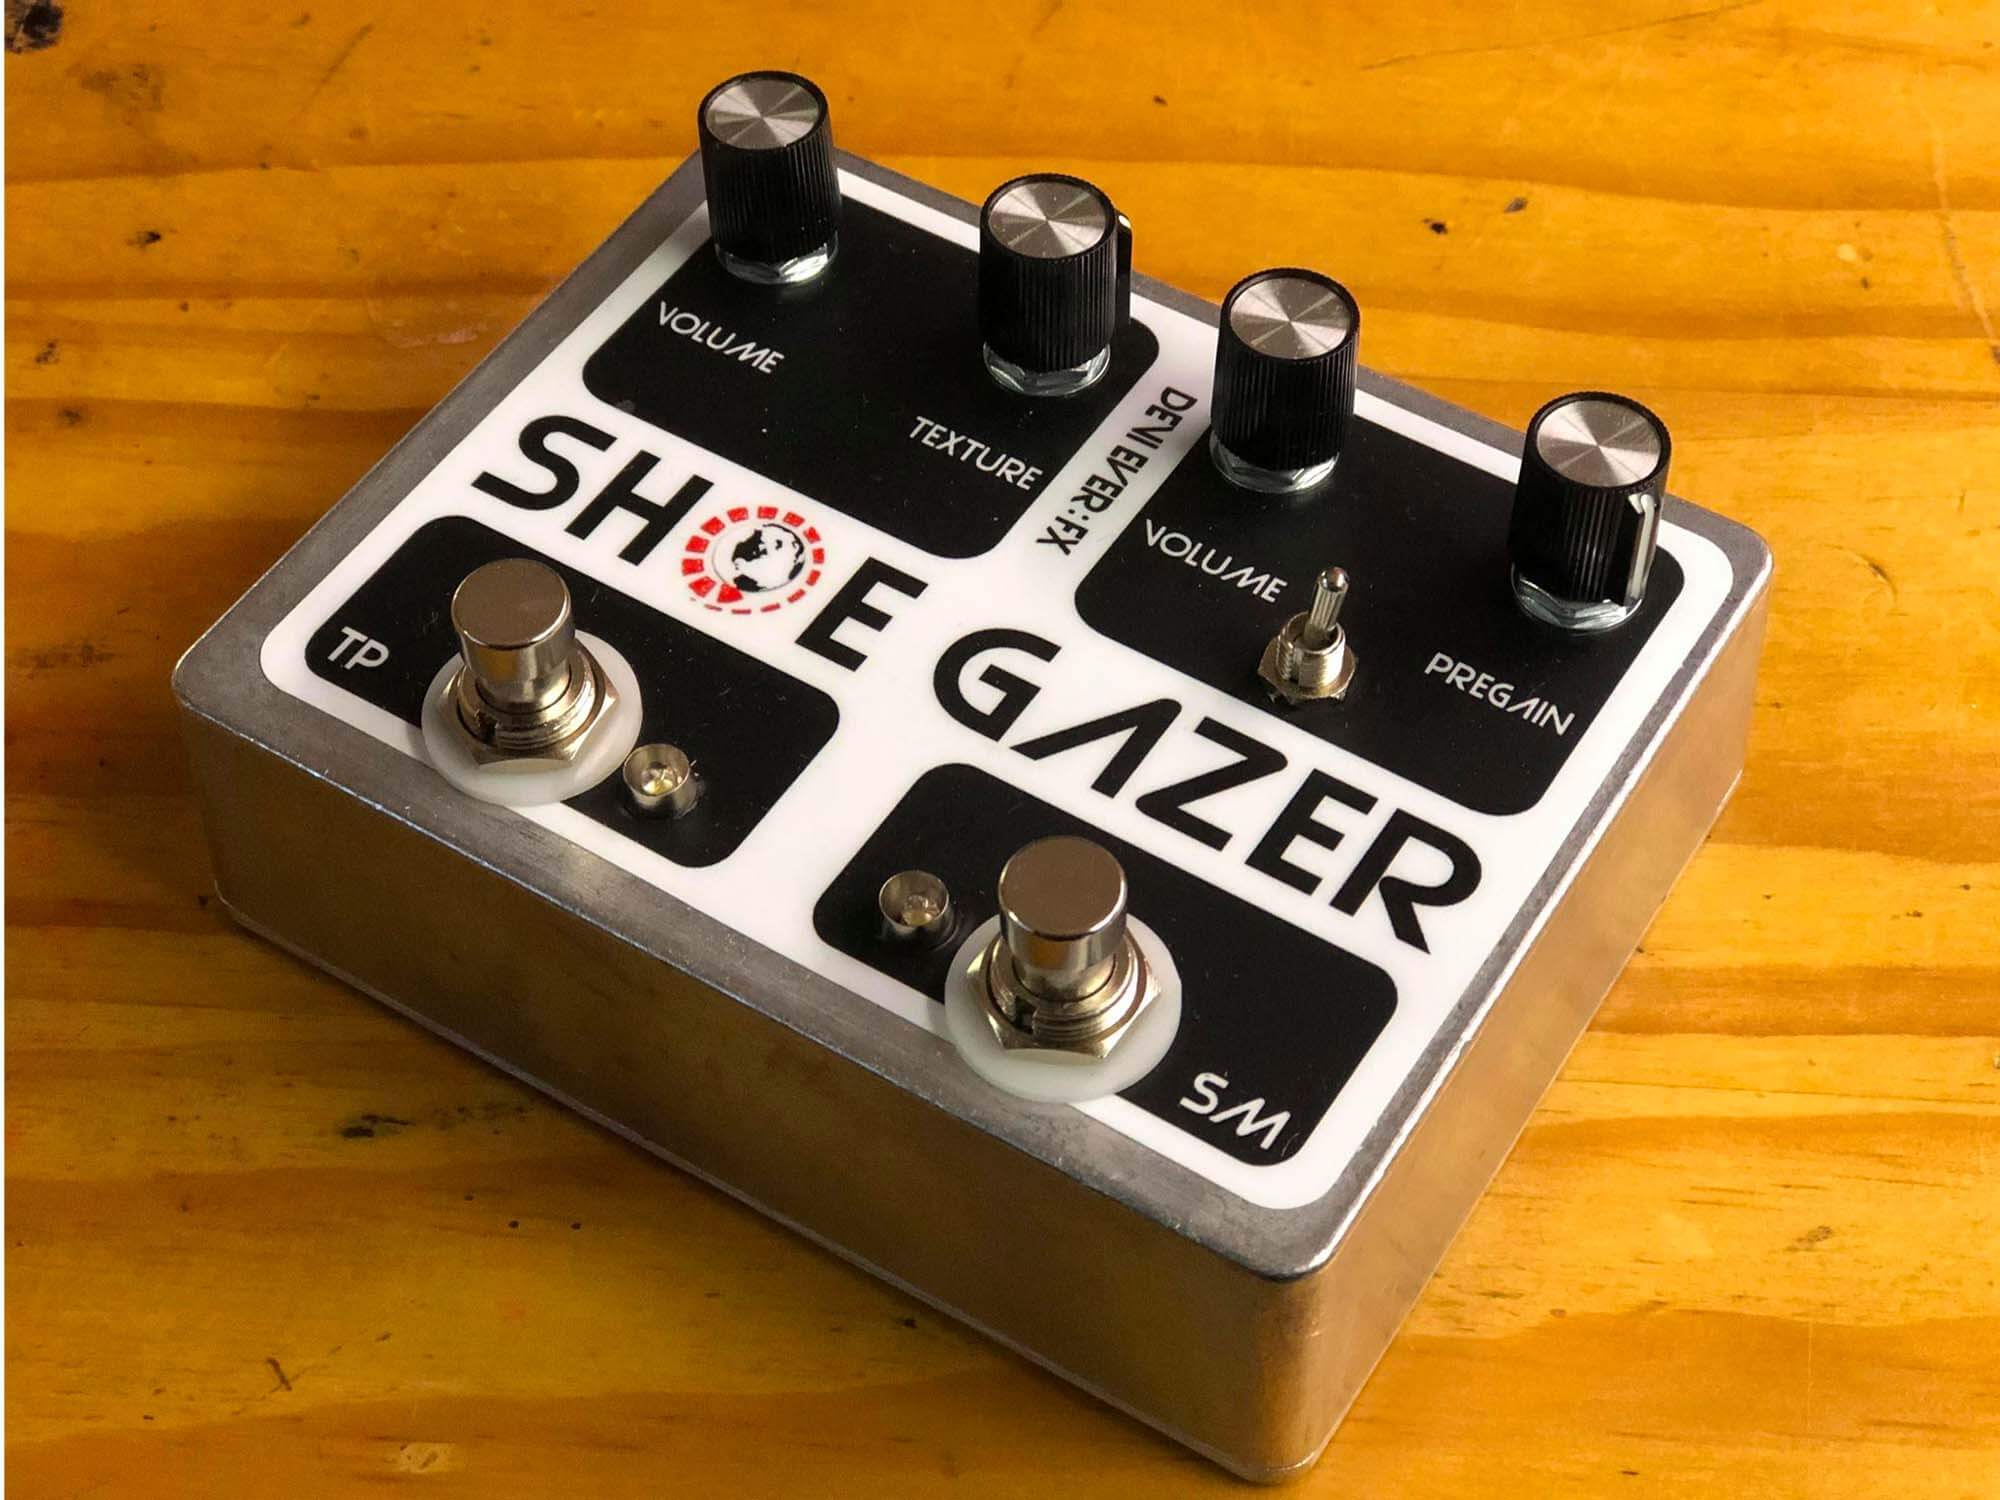 Devi Ever to start making and selling guitar pedals again: “I'm